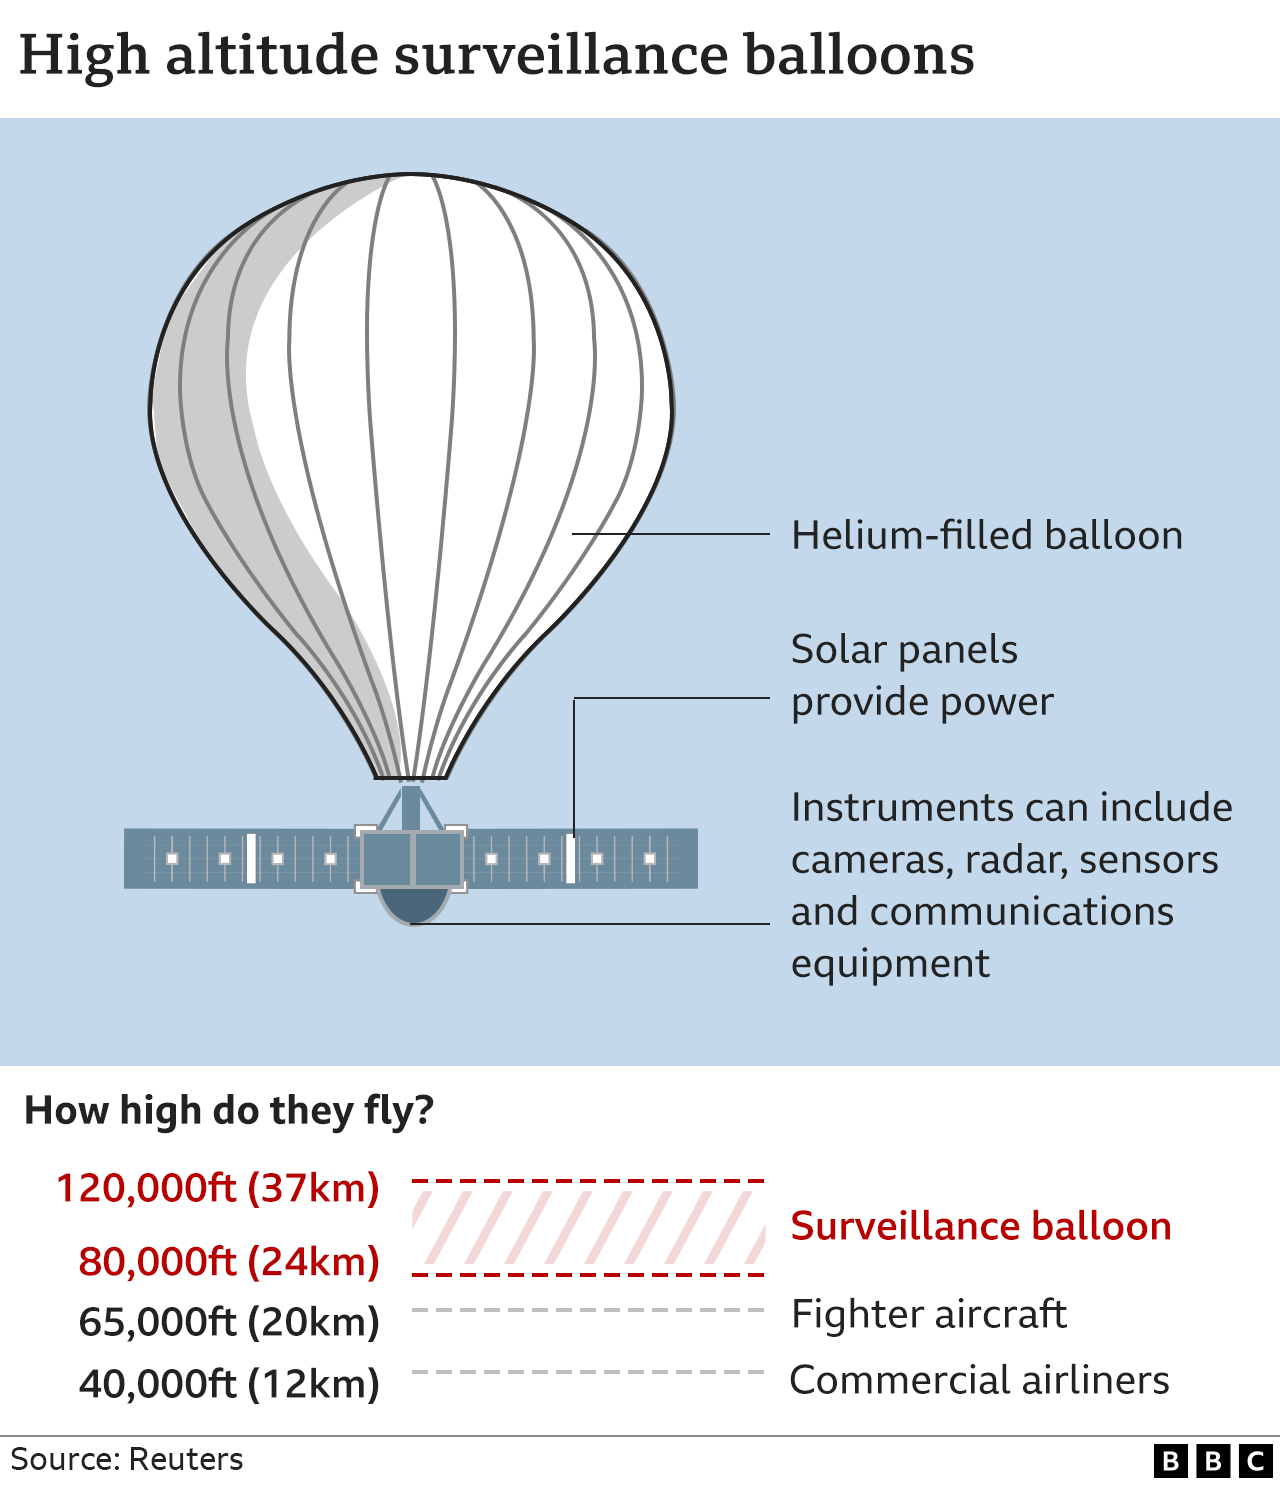 Graphic of high altitude balloon, showing helium filled balloon, solar panels and instruments bay which can include cameras, radar and communications equipment. They can fly at heights of 80,000ft-120,000ft, higher than fighter jets and commercial aircraft